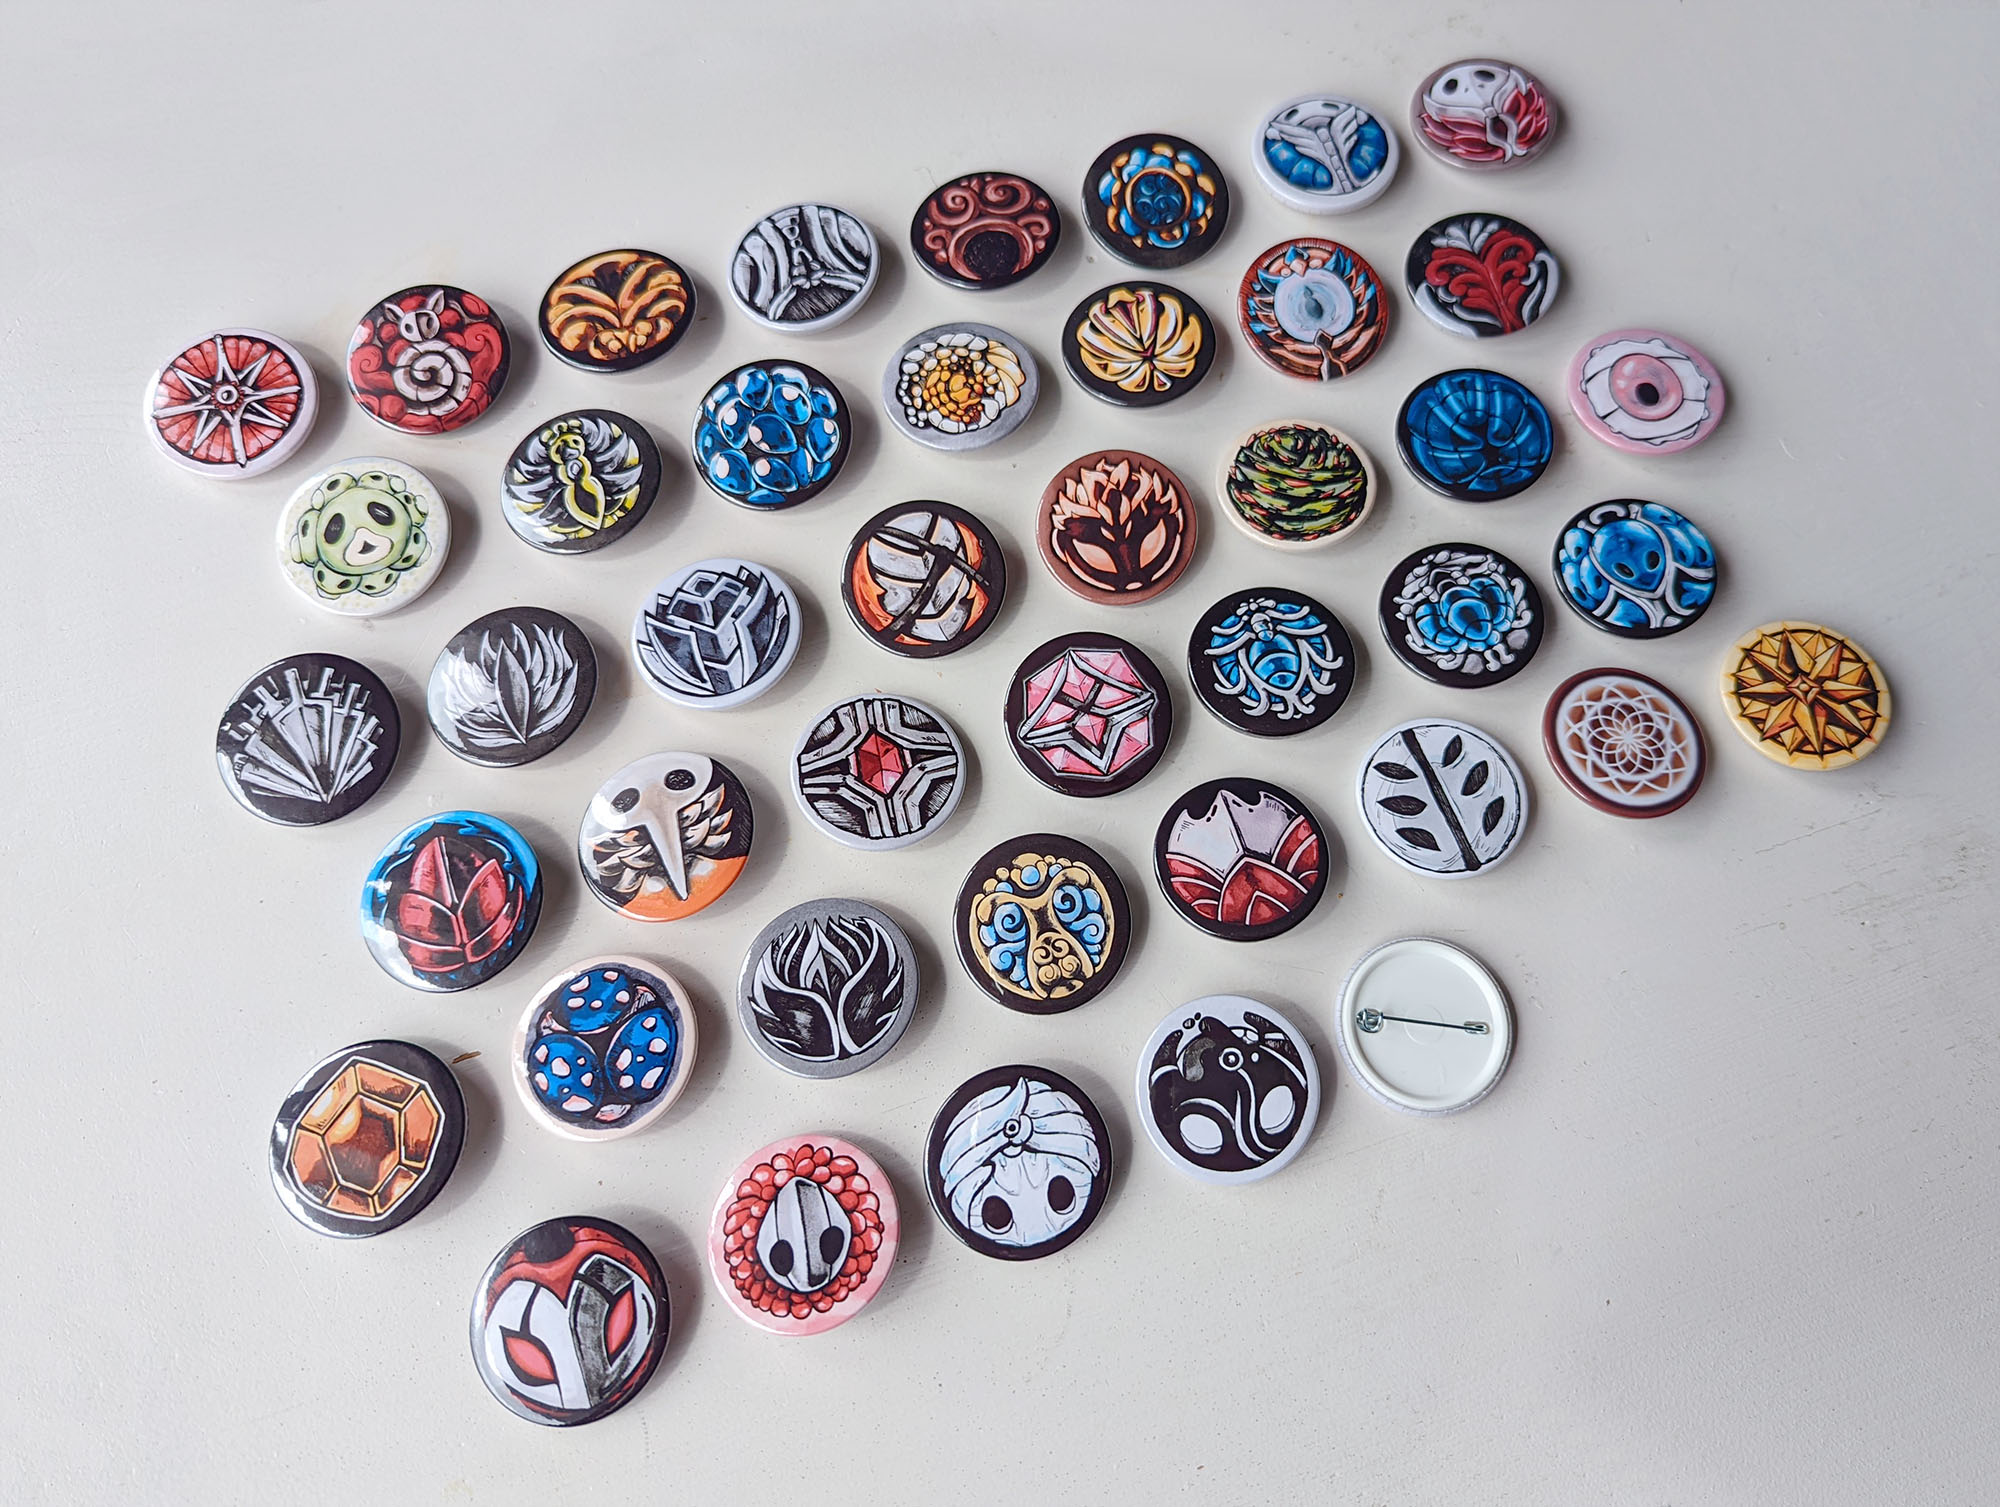 Foto-Hollow-Knight-buttons-2022-webshop by .